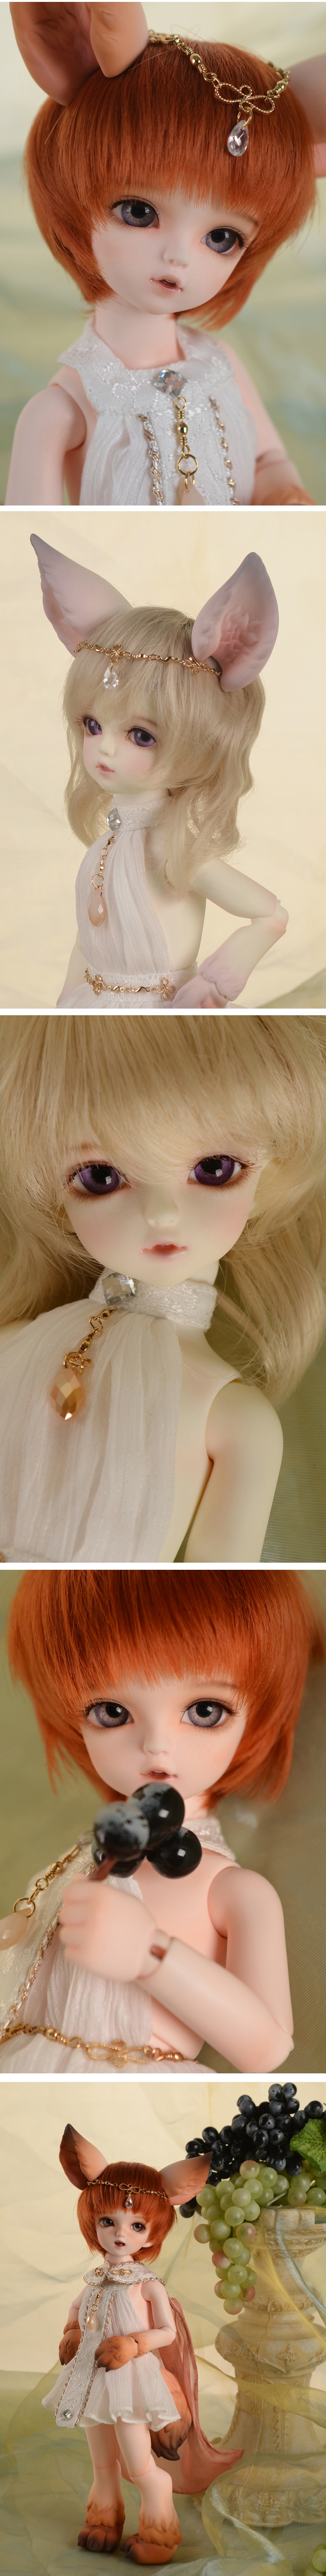 Feny & Necy  - The Fox and the Grapes bjd-3.jpg